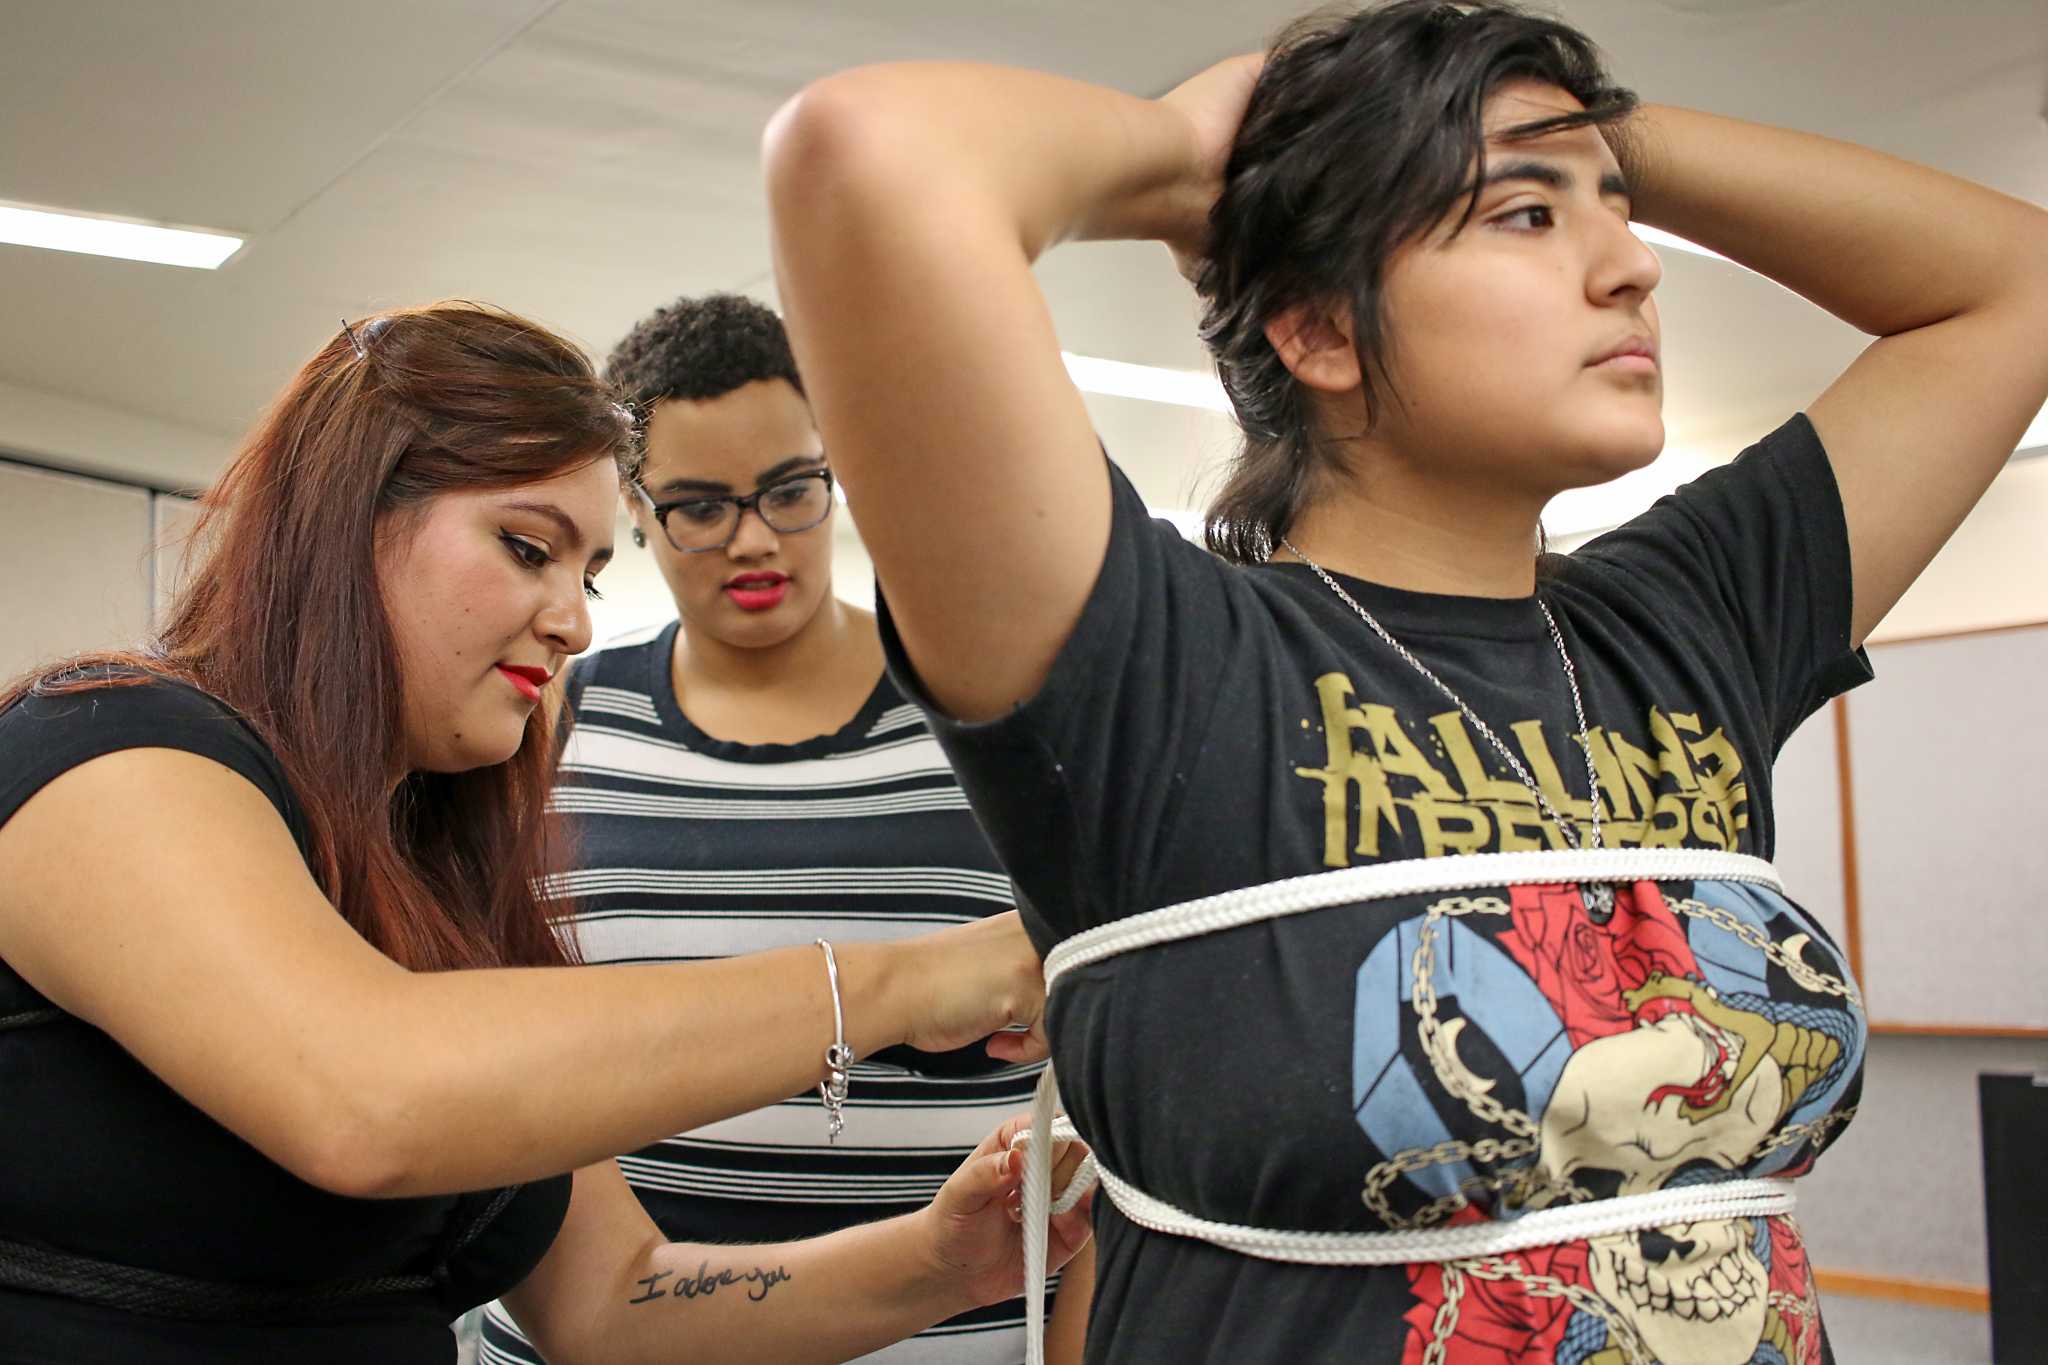 SF State’s Education and Referral Organization for Sexuality director Reyna Aguilar
(left) shows SF State computer science major Maya Chatman (center) how to perform a double limb rope bondage on pre-child adolescent development major Felicia Macedo
(right) during the Playing by the Ropes: Kink & Bondage 101 event in the Rosa Parks Conference Room on Wednesday, Oct. 26, 2016. (George Morin/Xpress)